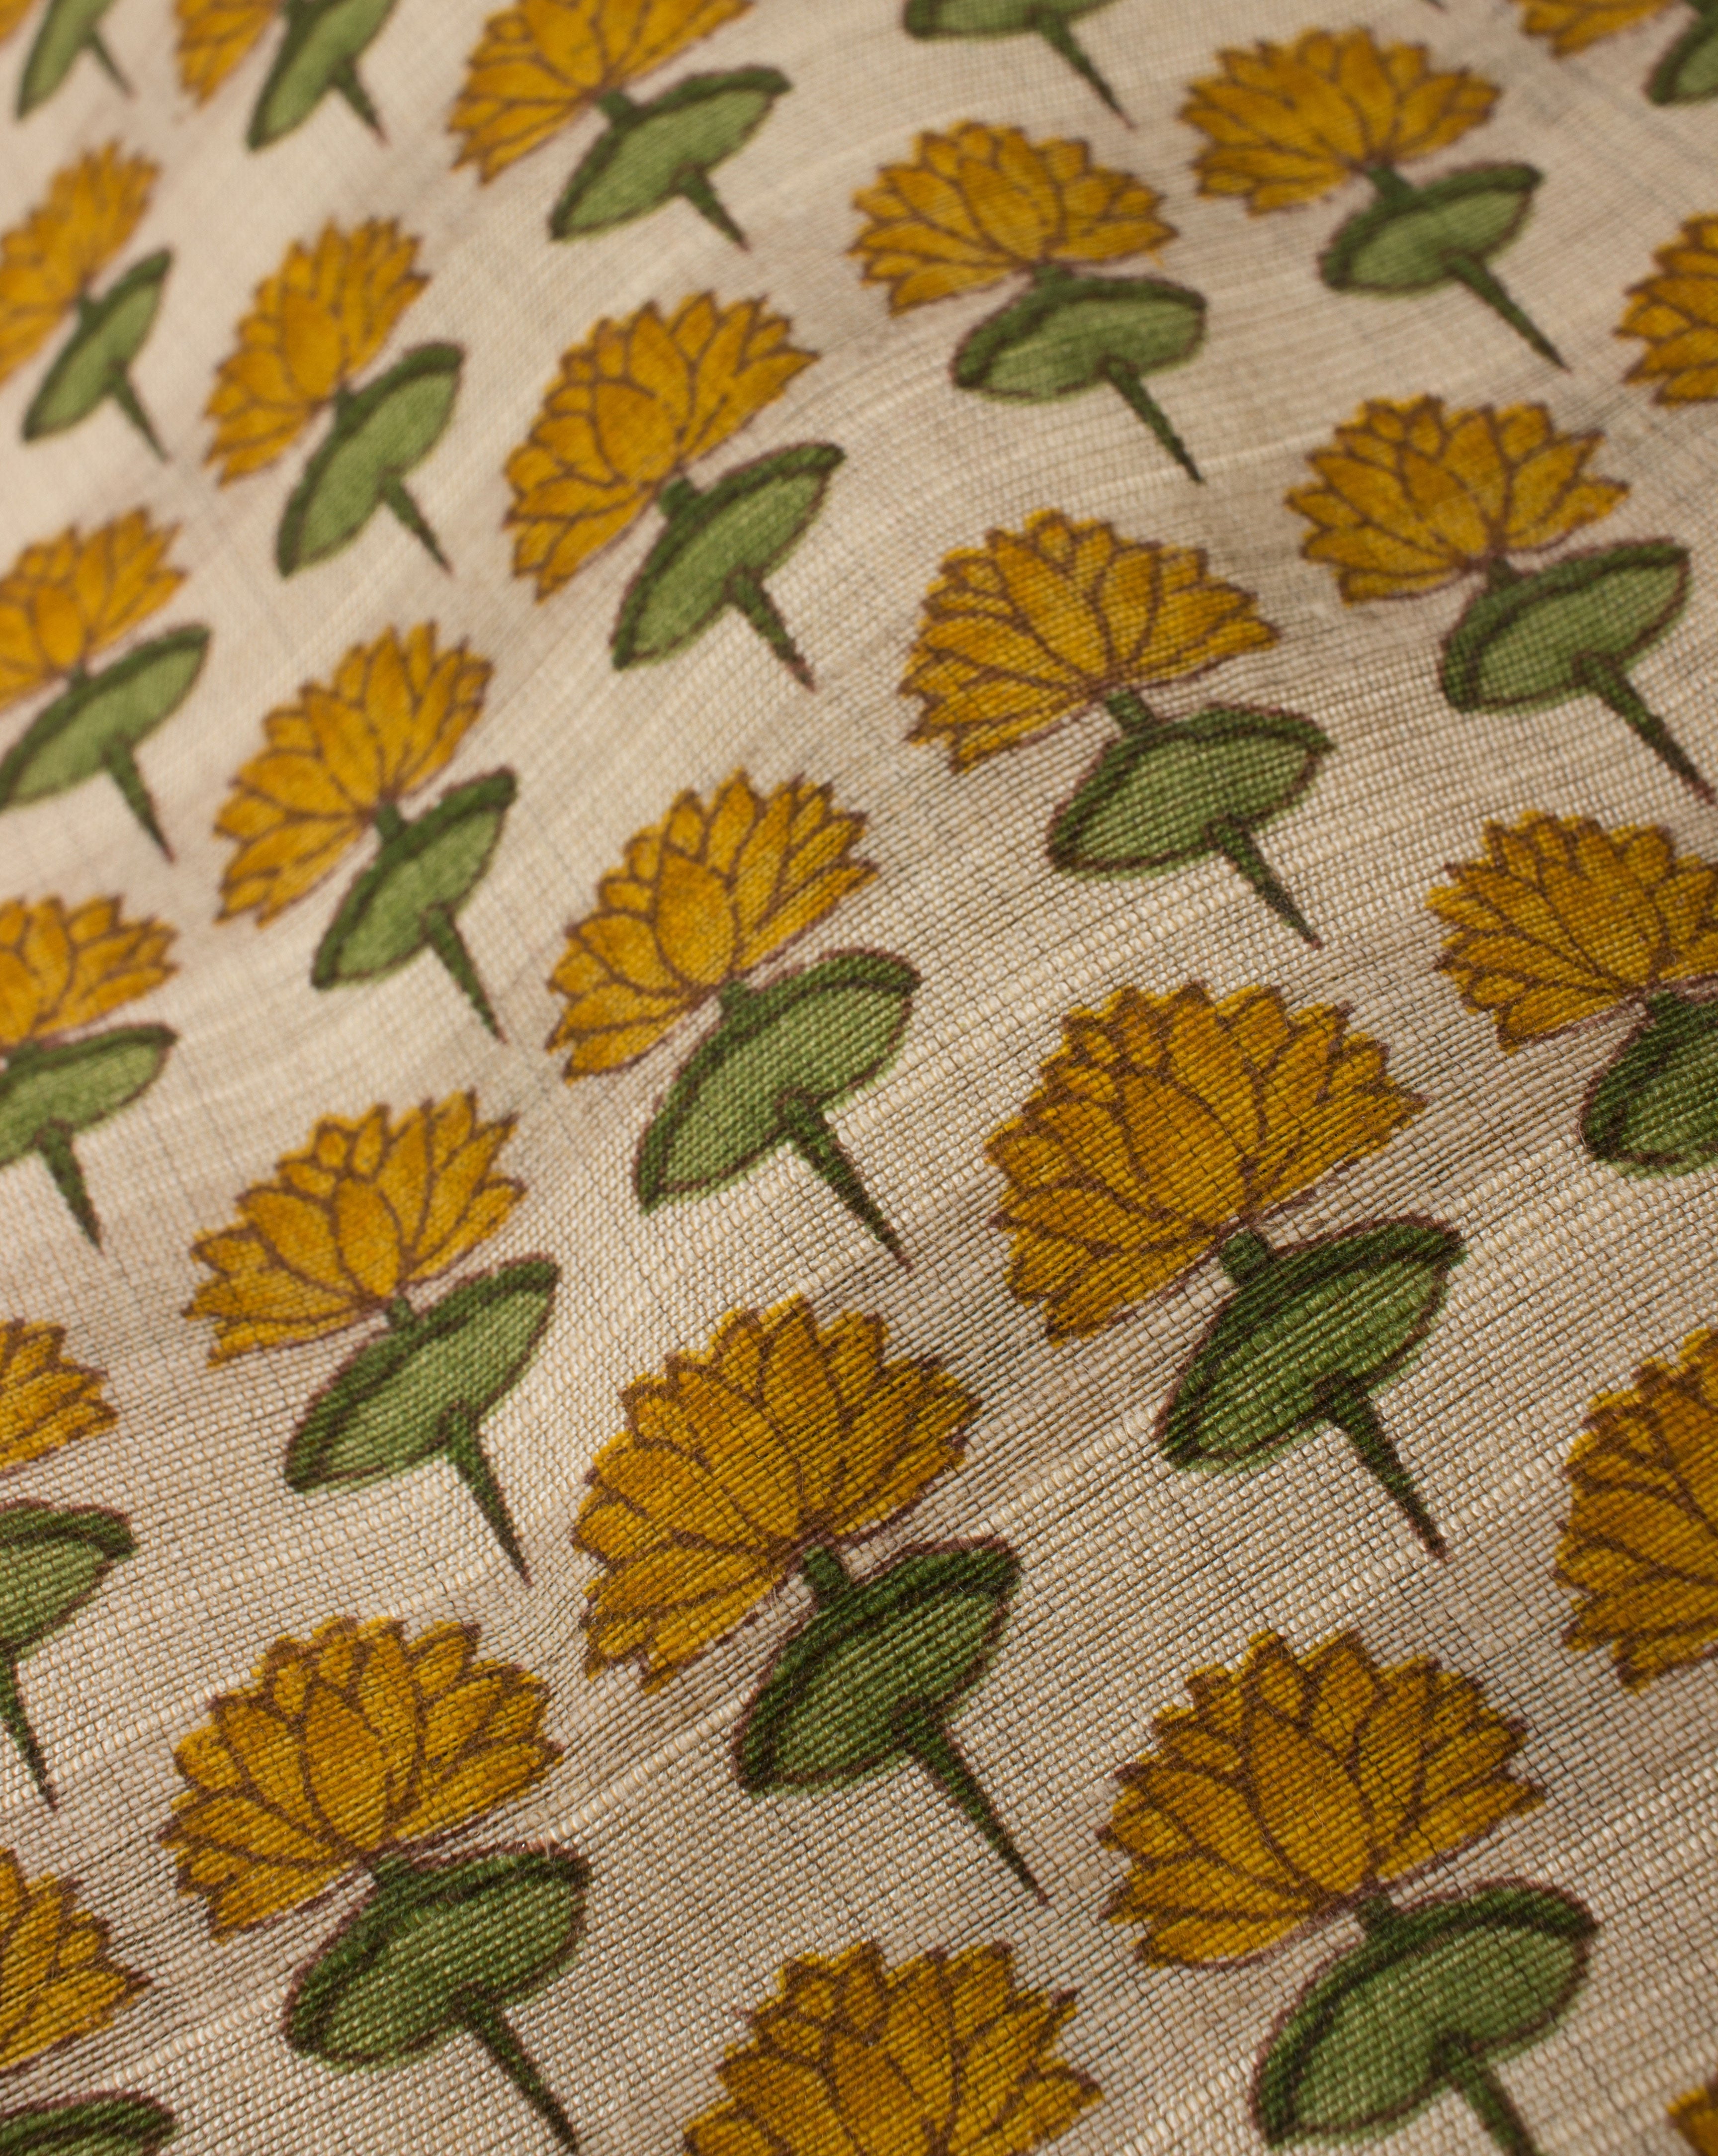 Off-White Yellow Floral Pattern Screen Print Chanderi Fabric ( Width 48 Inch ) - Fabriclore.com